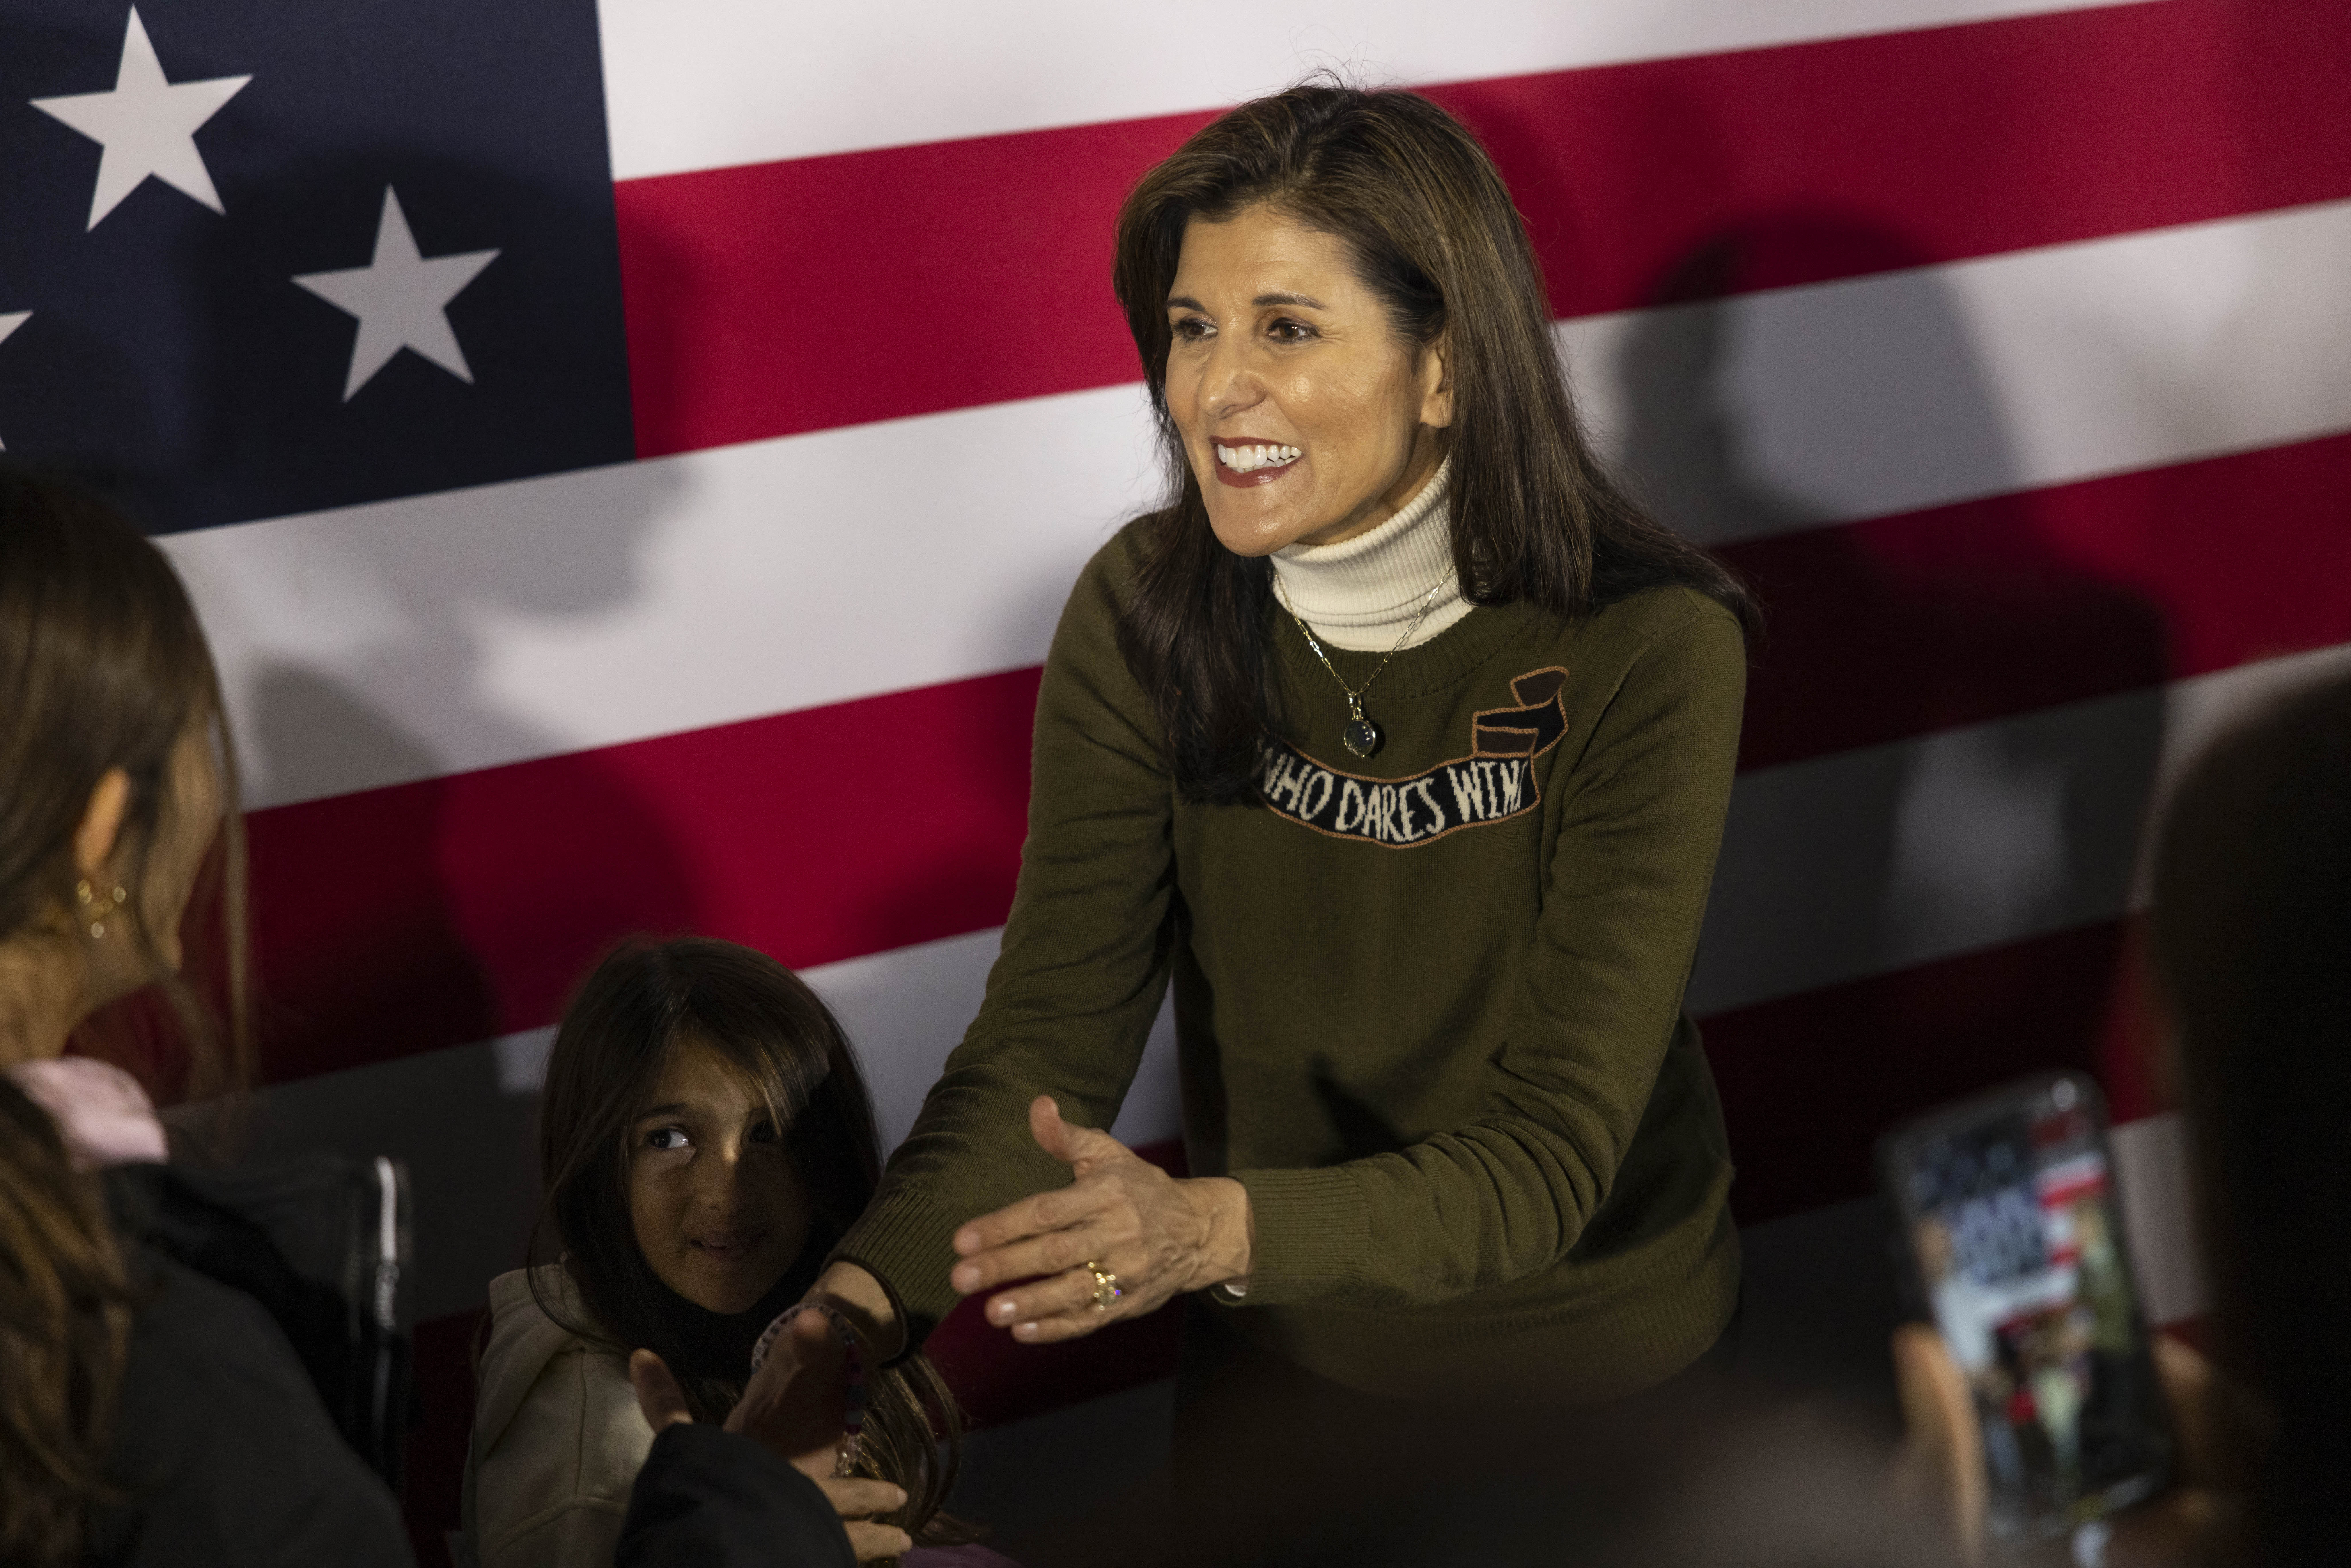 Former South Carolina Gov. Nikki Haley greets her supporters at a campaign event in Iowa City, Iowa, on January 13.